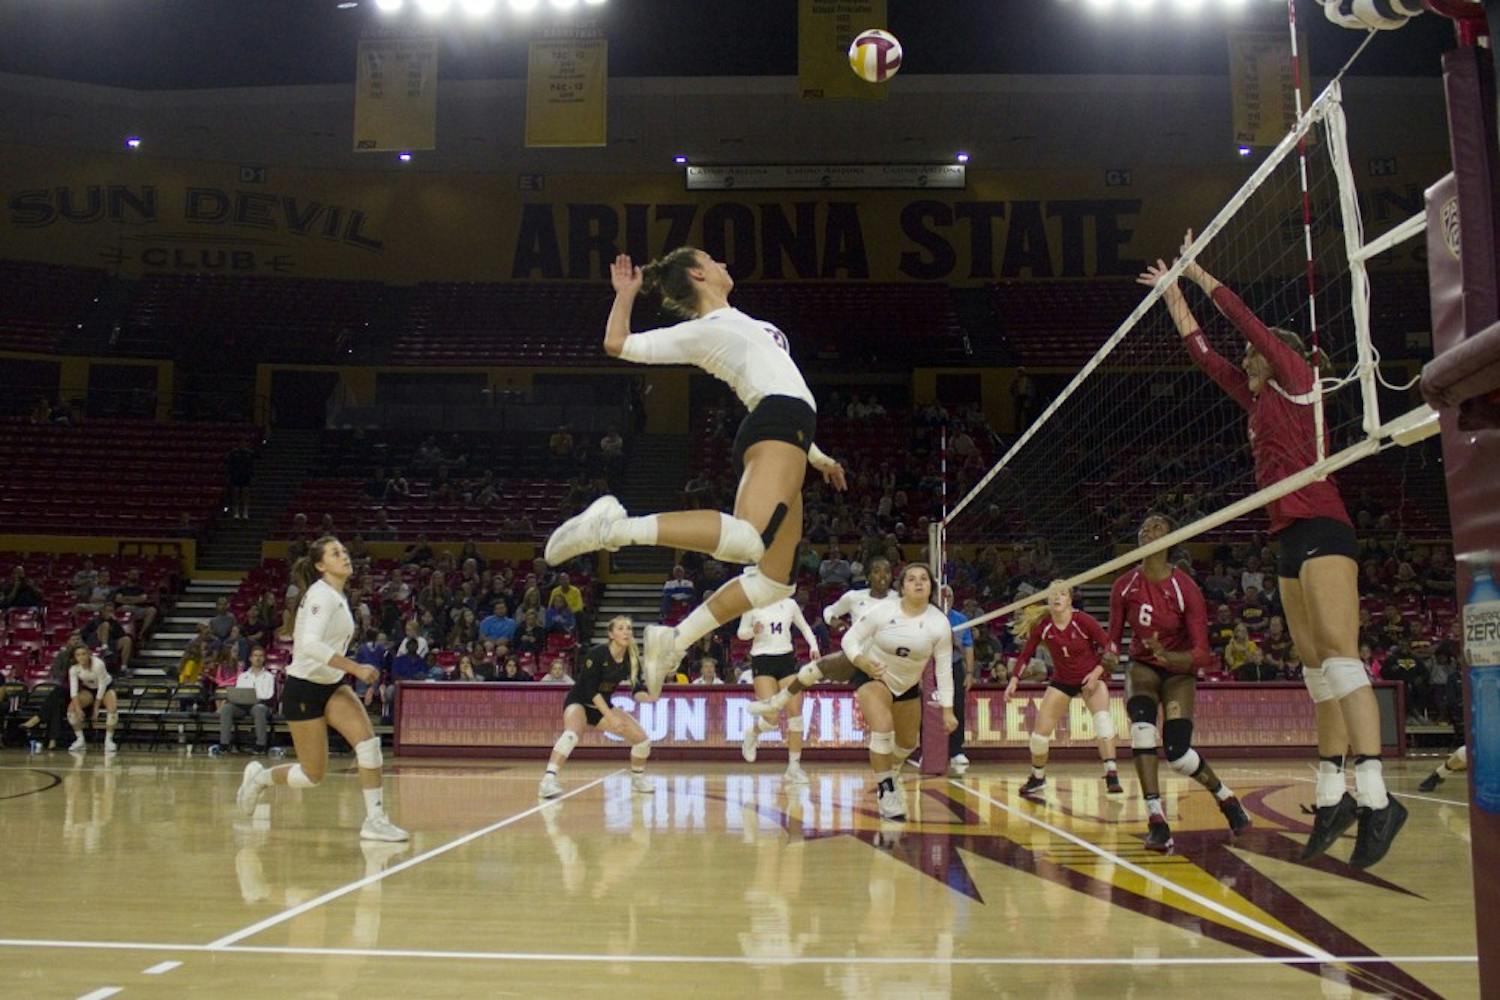 ASU freshman outside hitter Ivana Jeremic (21) jumps high for a spike in the second set of a 3-0 loss to the Stanford Cardinal in Wells Fargo Arena in Tempe, Arizona, on Friday, Nov. 18, 2016.